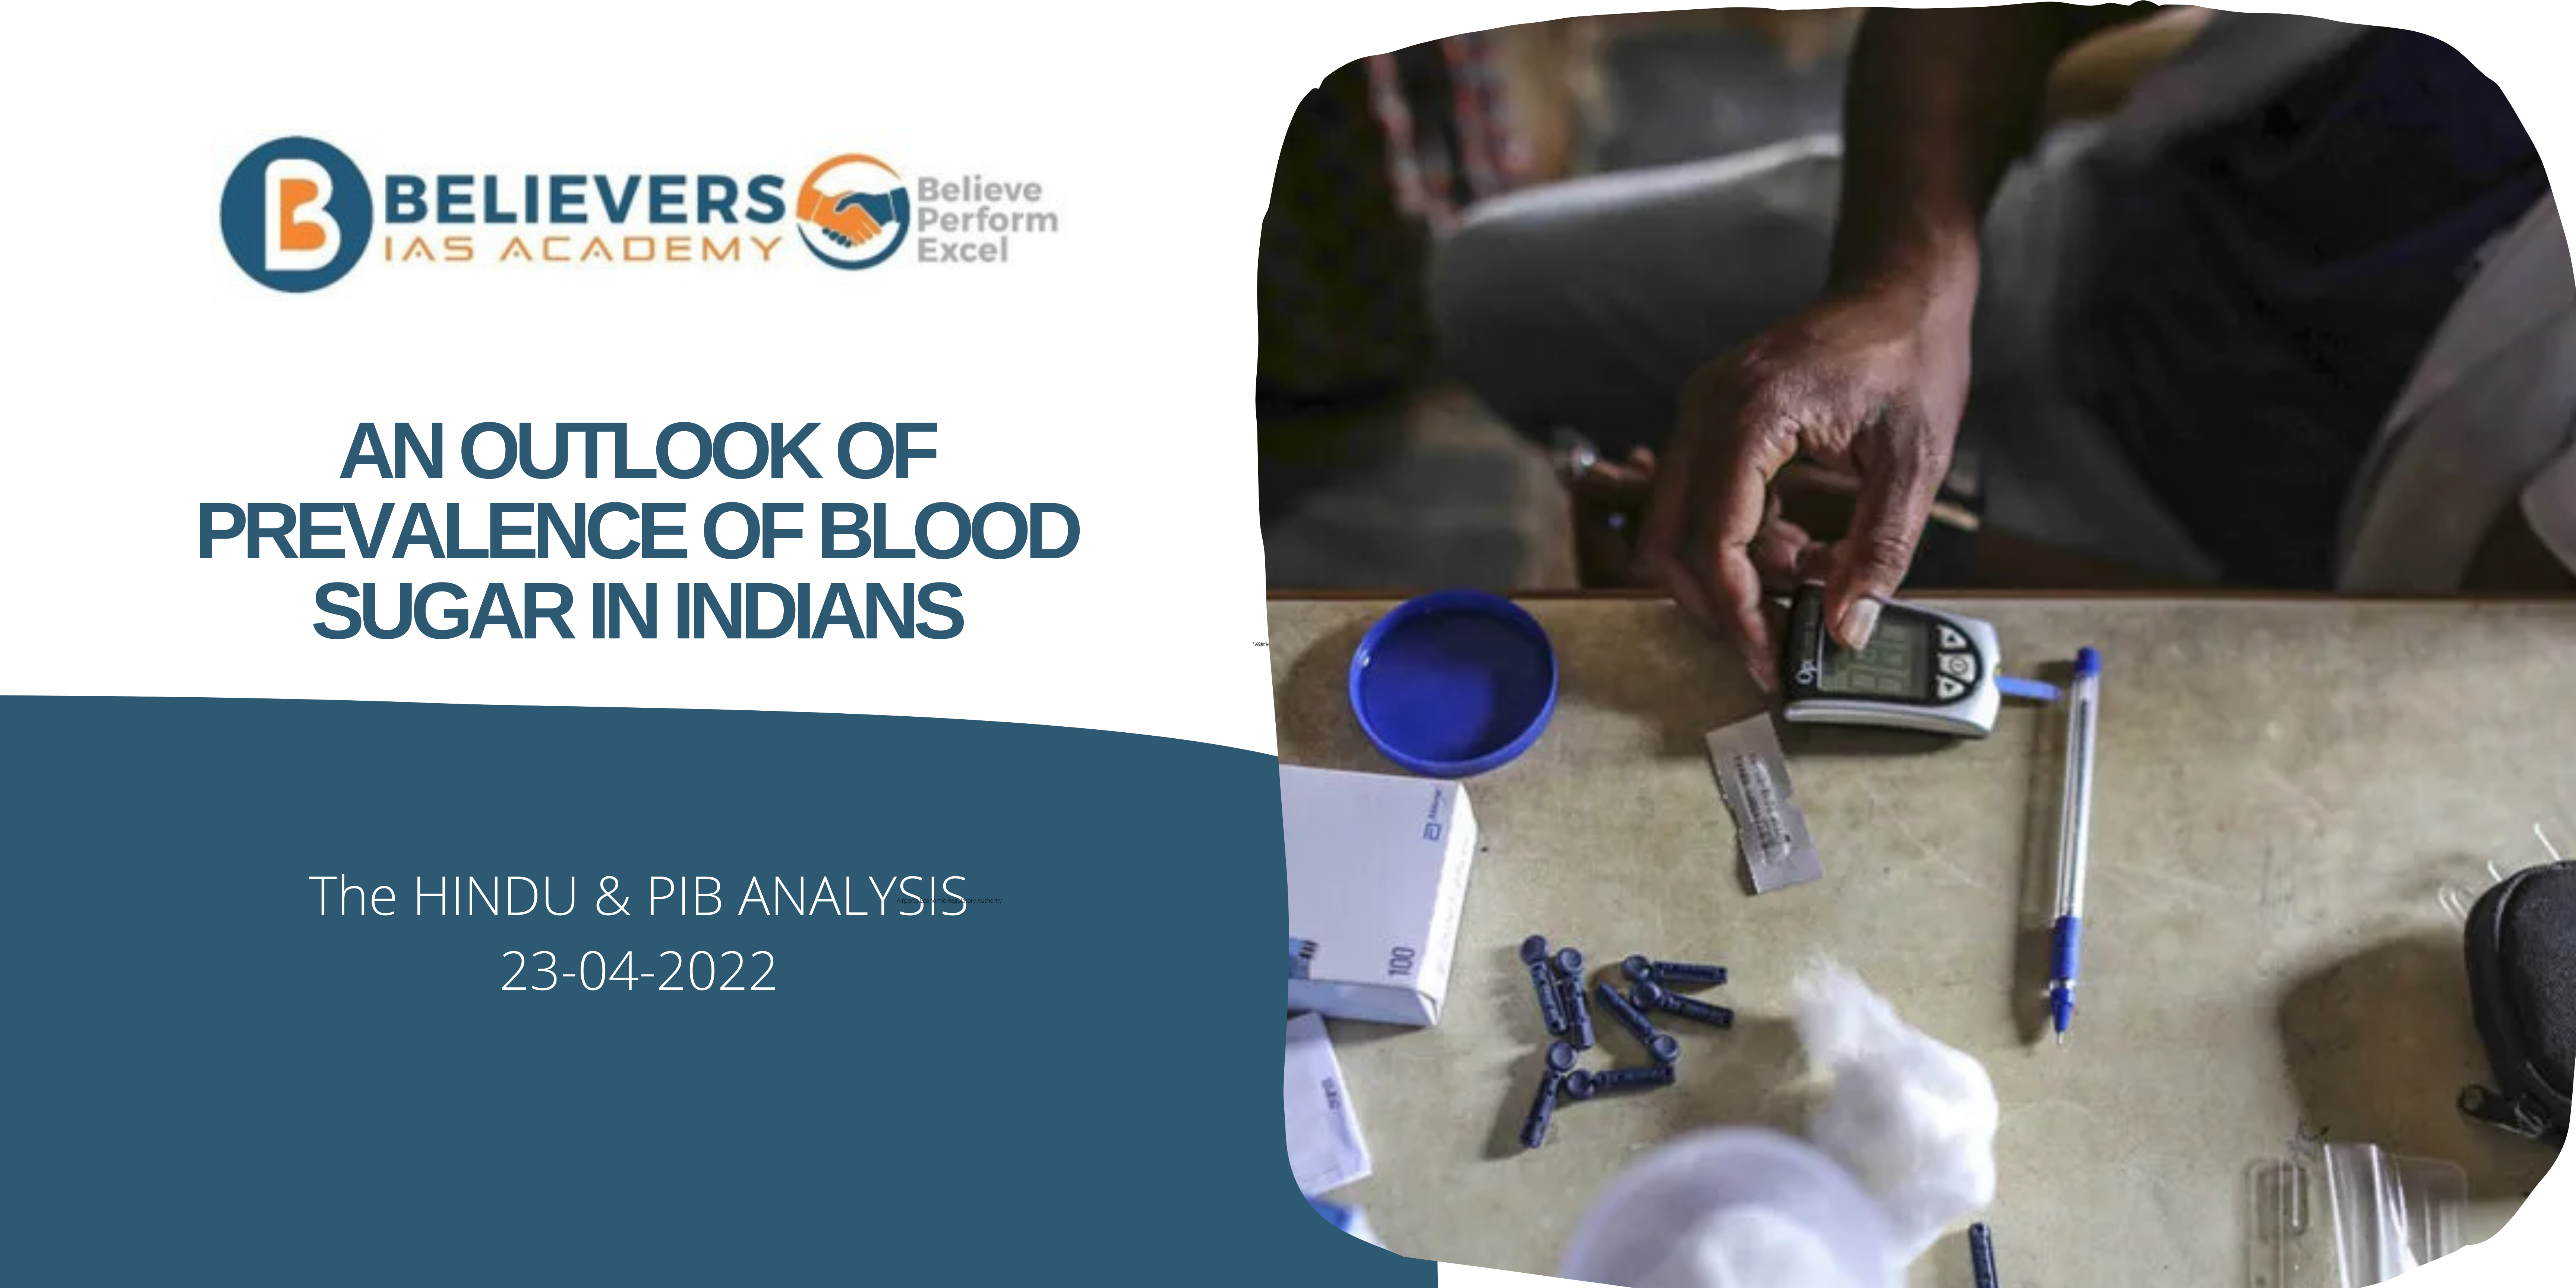 Civil services Current affairs - An outlook of Prevalence of Blood Sugar in Indians